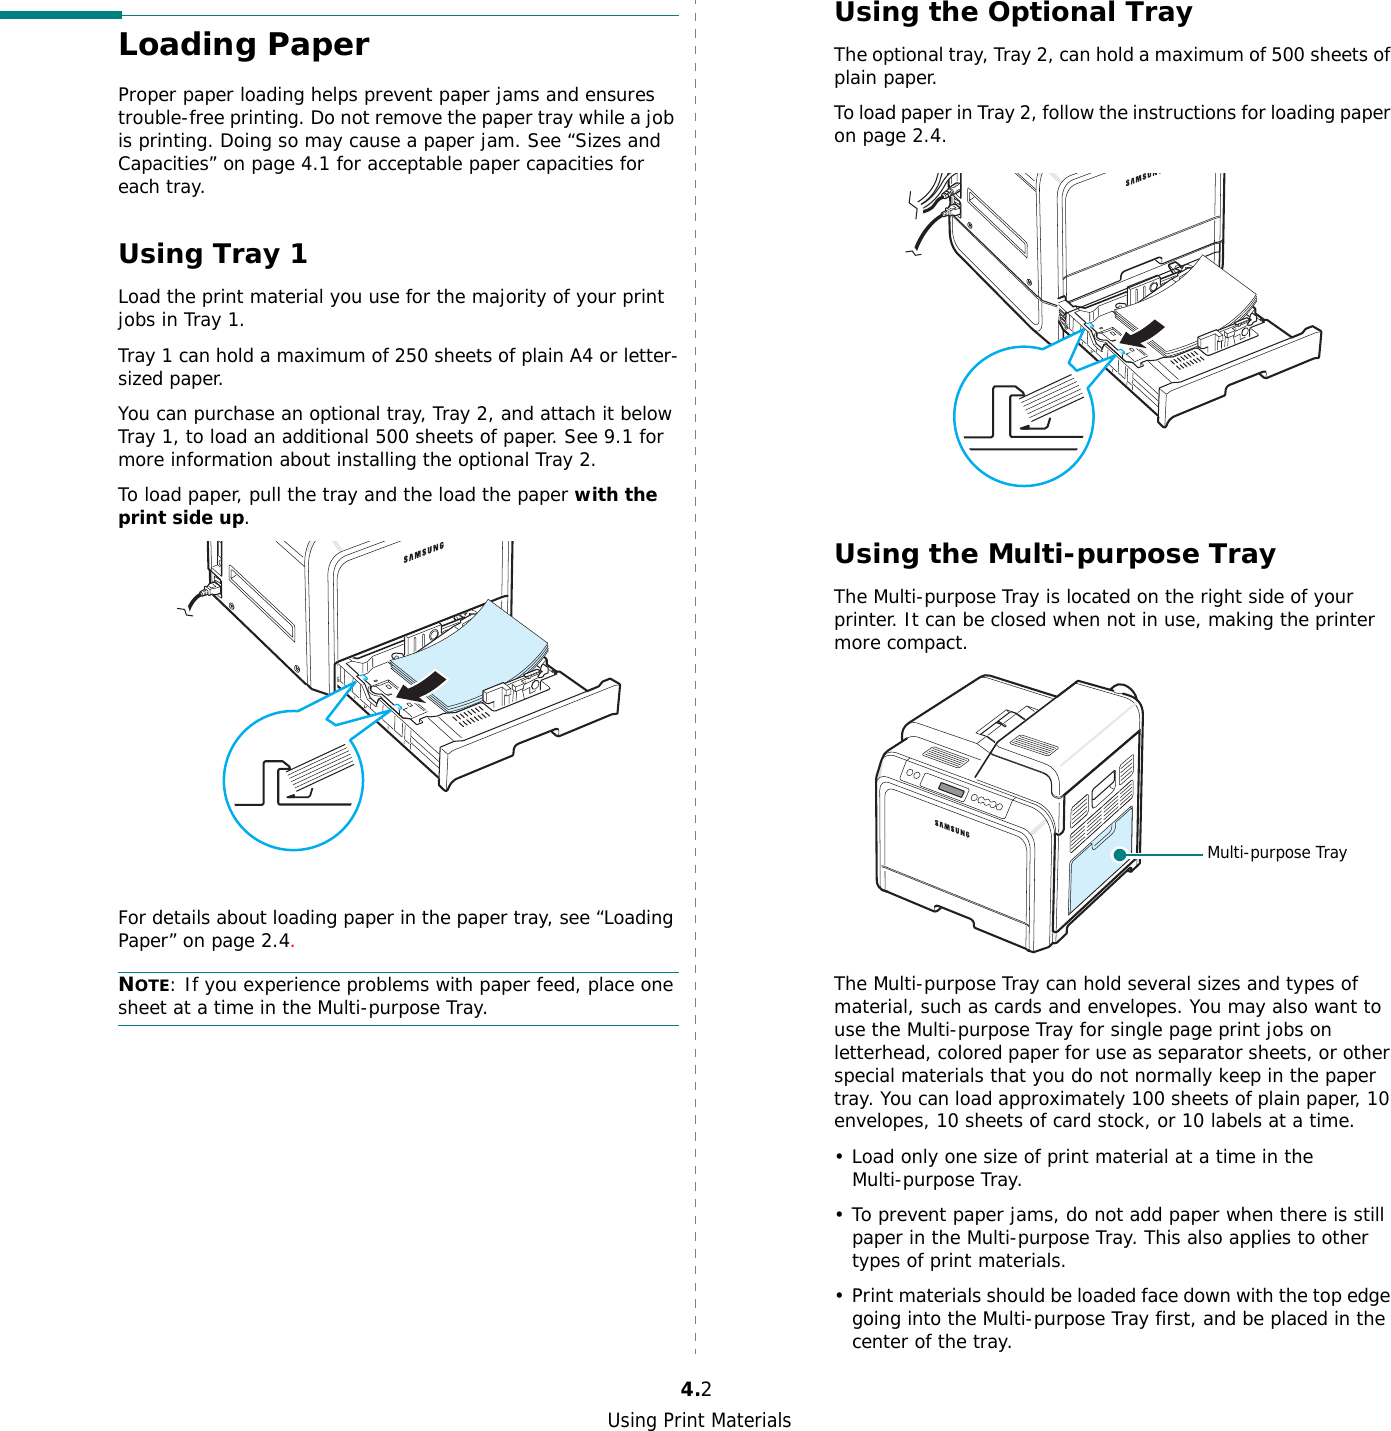 Using Print Materials4.2Loading PaperProper paper loading helps prevent paper jams and ensures trouble-free printing. Do not remove the paper tray while a job is printing. Doing so may cause a paper jam. See “Sizes and Capacities” on page 4.1 for acceptable paper capacities for each tray. Using Tray 1 Load the print material you use for the majority of your print jobs in Tray 1.Tray 1 can hold a maximum of 250 sheets of plain A4 or letter-sized paper.You can purchase an optional tray, Tray 2, and attach it below Tray 1, to load an additional 500 sheets of paper. See 9.1 for more information about installing the optional Tray 2.To load paper, pull the tray and the load the paper with the print side up.For details about loading paper in the paper tray, see “Loading Paper” on page 2.4. NOTE: If you experience problems with paper feed, place one sheet at a time in the Multi-purpose Tray.Using the Optional Tray The optional tray, Tray 2, can hold a maximum of 500 sheets of plain paper.To load paper in Tray 2, follow the instructions for loading paper on page 2.4.Using the Multi-purpose TrayThe Multi-purpose Tray is located on the right side of your printer. It can be closed when not in use, making the printer more compact. The Multi-purpose Tray can hold several sizes and types of material, such as cards and envelopes. You may also want to use the Multi-purpose Tray for single page print jobs on letterhead, colored paper for use as separator sheets, or other special materials that you do not normally keep in the paper tray. You can load approximately 100 sheets of plain paper, 10 envelopes, 10 sheets of card stock, or 10 labels at a time. • Load only one size of print material at a time in the Multi-purpose Tray.• To prevent paper jams, do not add paper when there is still paper in the Multi-purpose Tray. This also applies to other types of print materials.• Print materials should be loaded face down with the top edge going into the Multi-purpose Tray first, and be placed in the center of the tray.Multi-purpose Tray